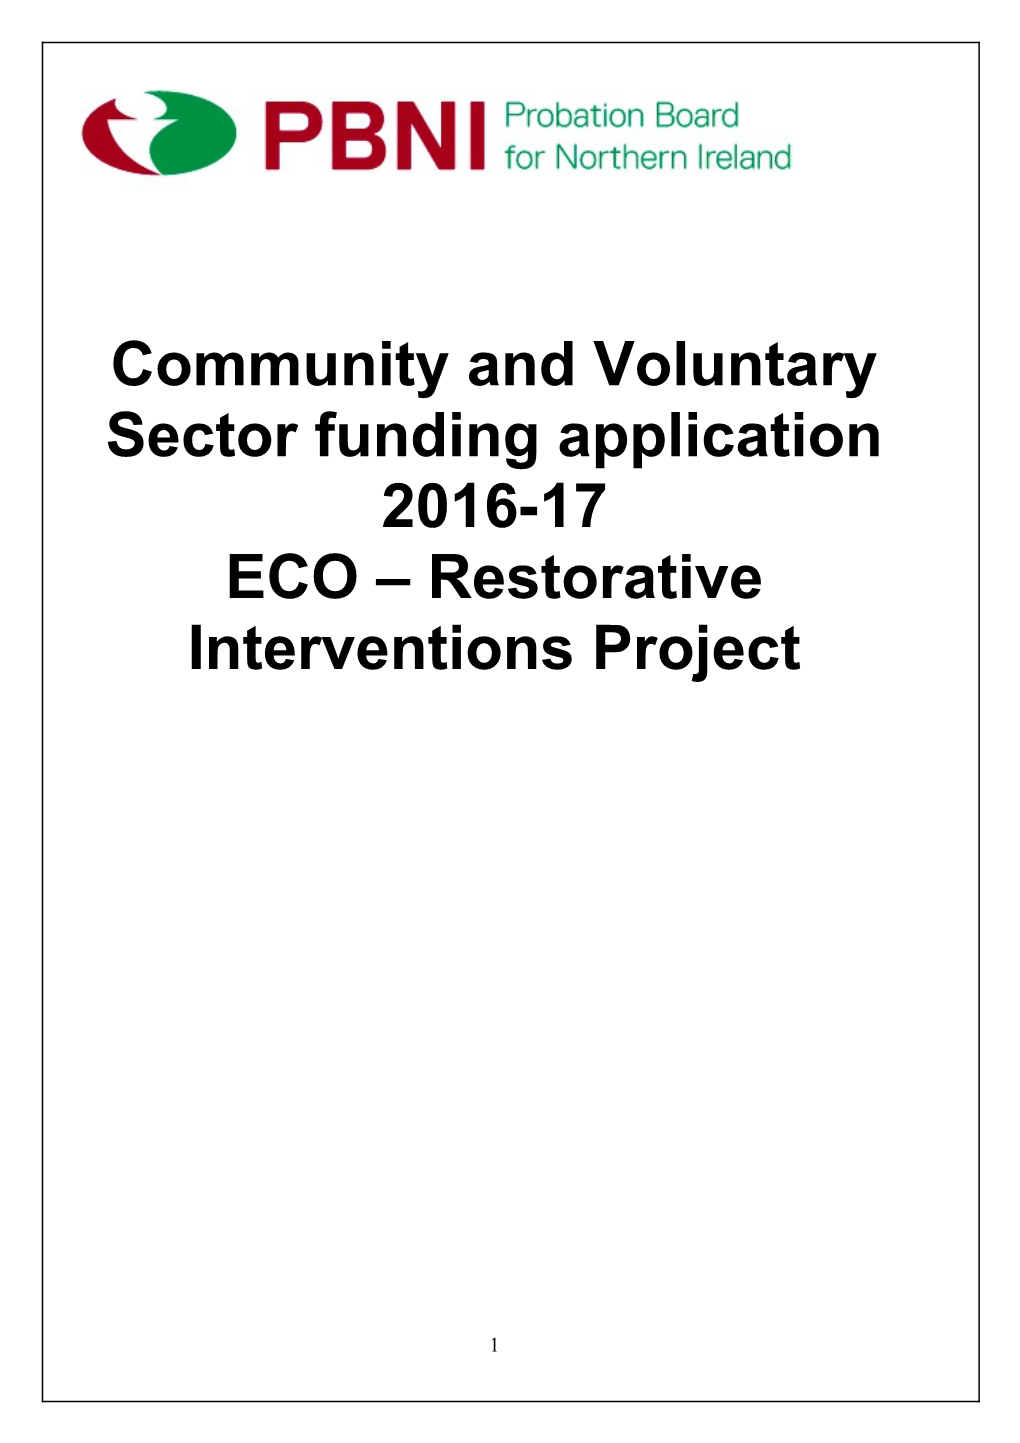 Community and Voluntary Sector Funding Application